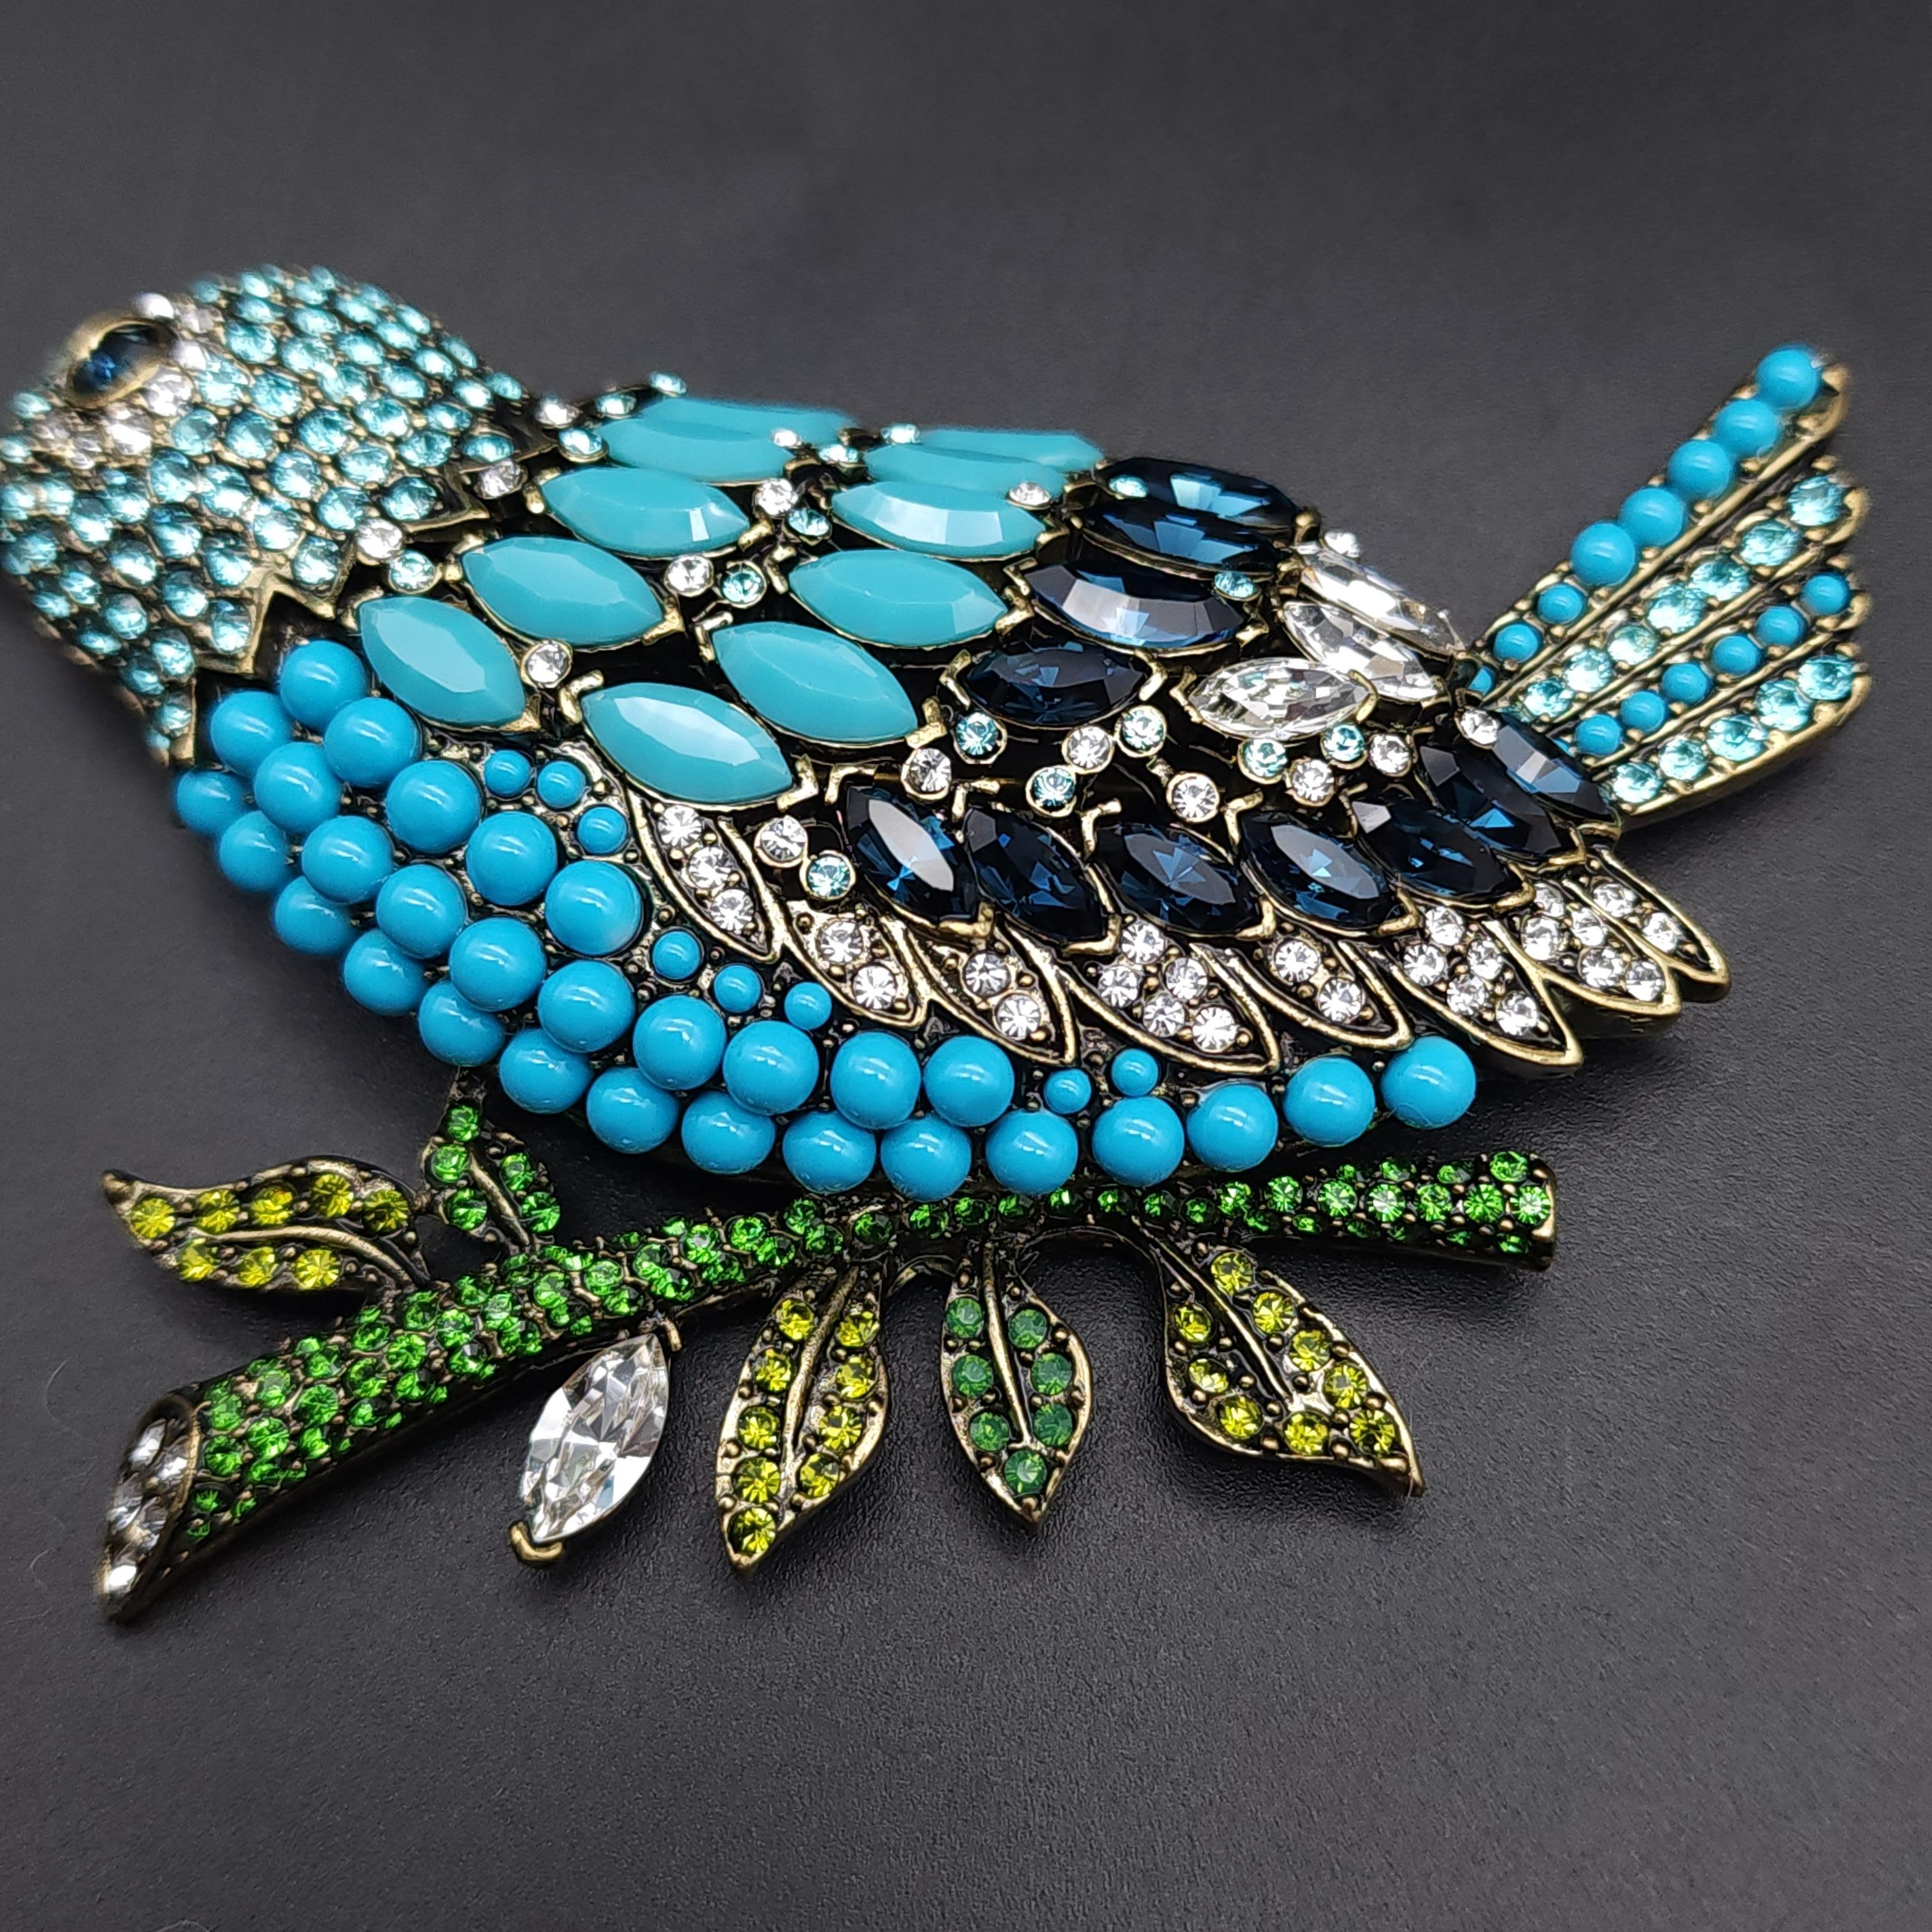 Round Cut Heidi Daus Marquise Madness Jeweled Perched Bird Pin Brooch, Turquoise For Sale